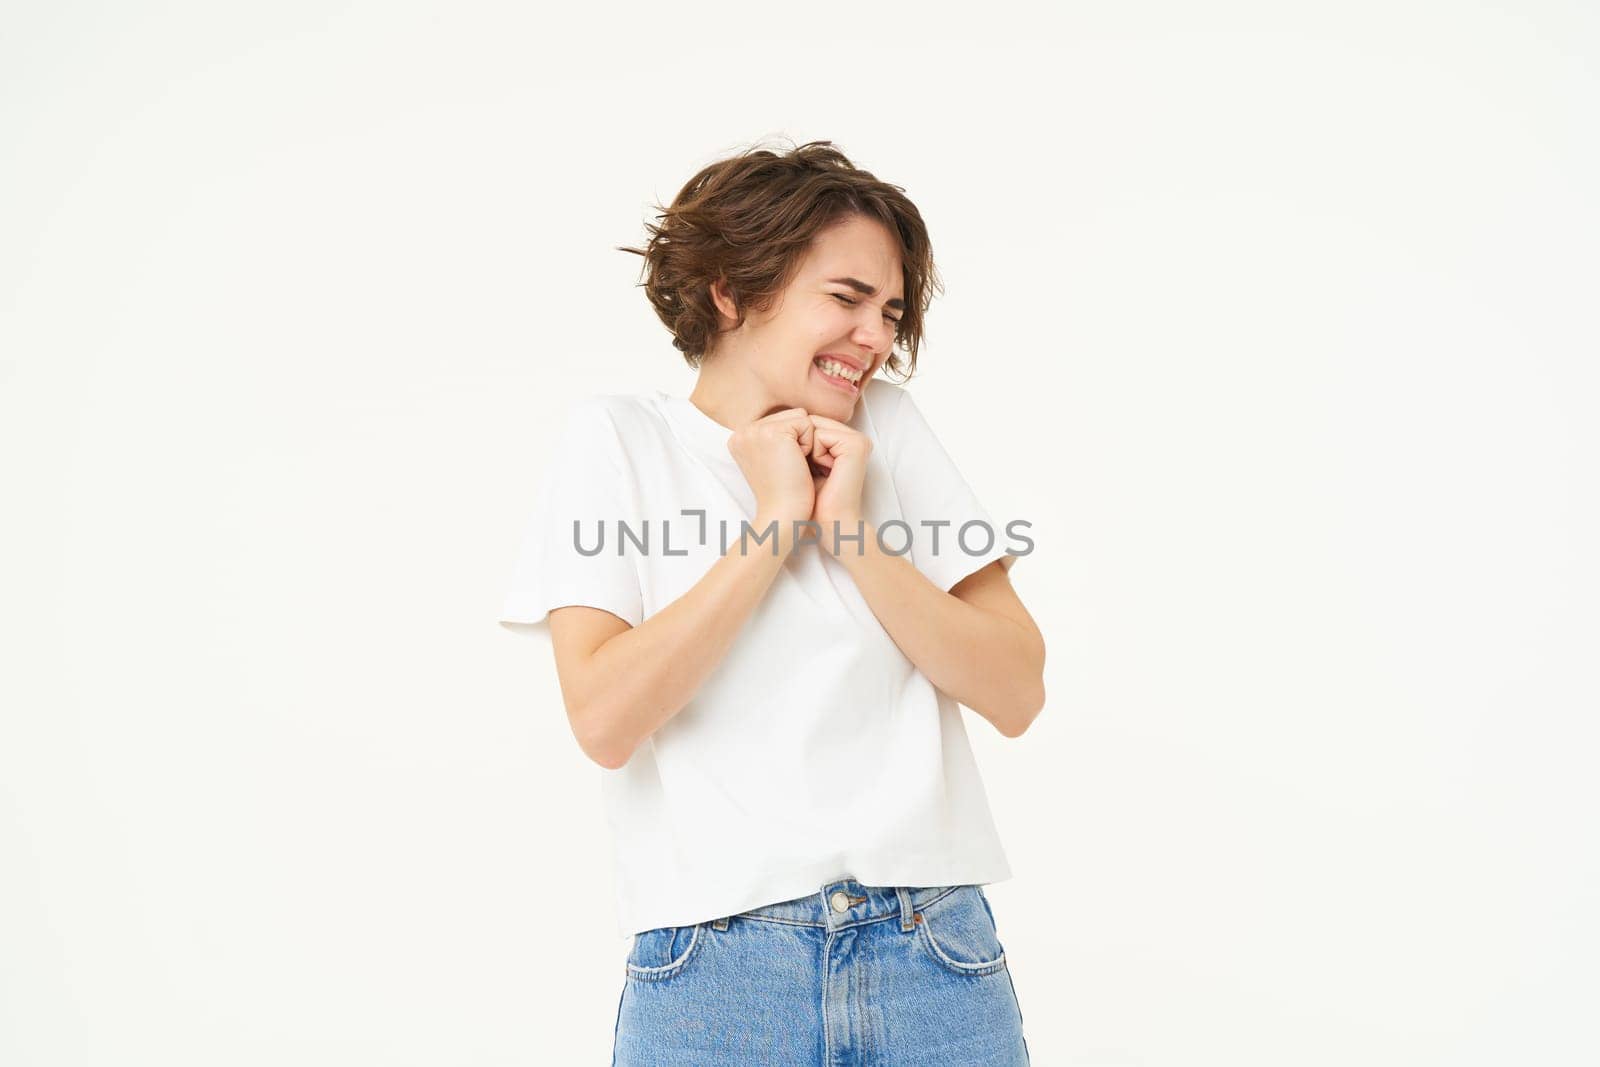 Image of woman with scared face, looks frightened, worried, trembling from fear, isolated against white background.